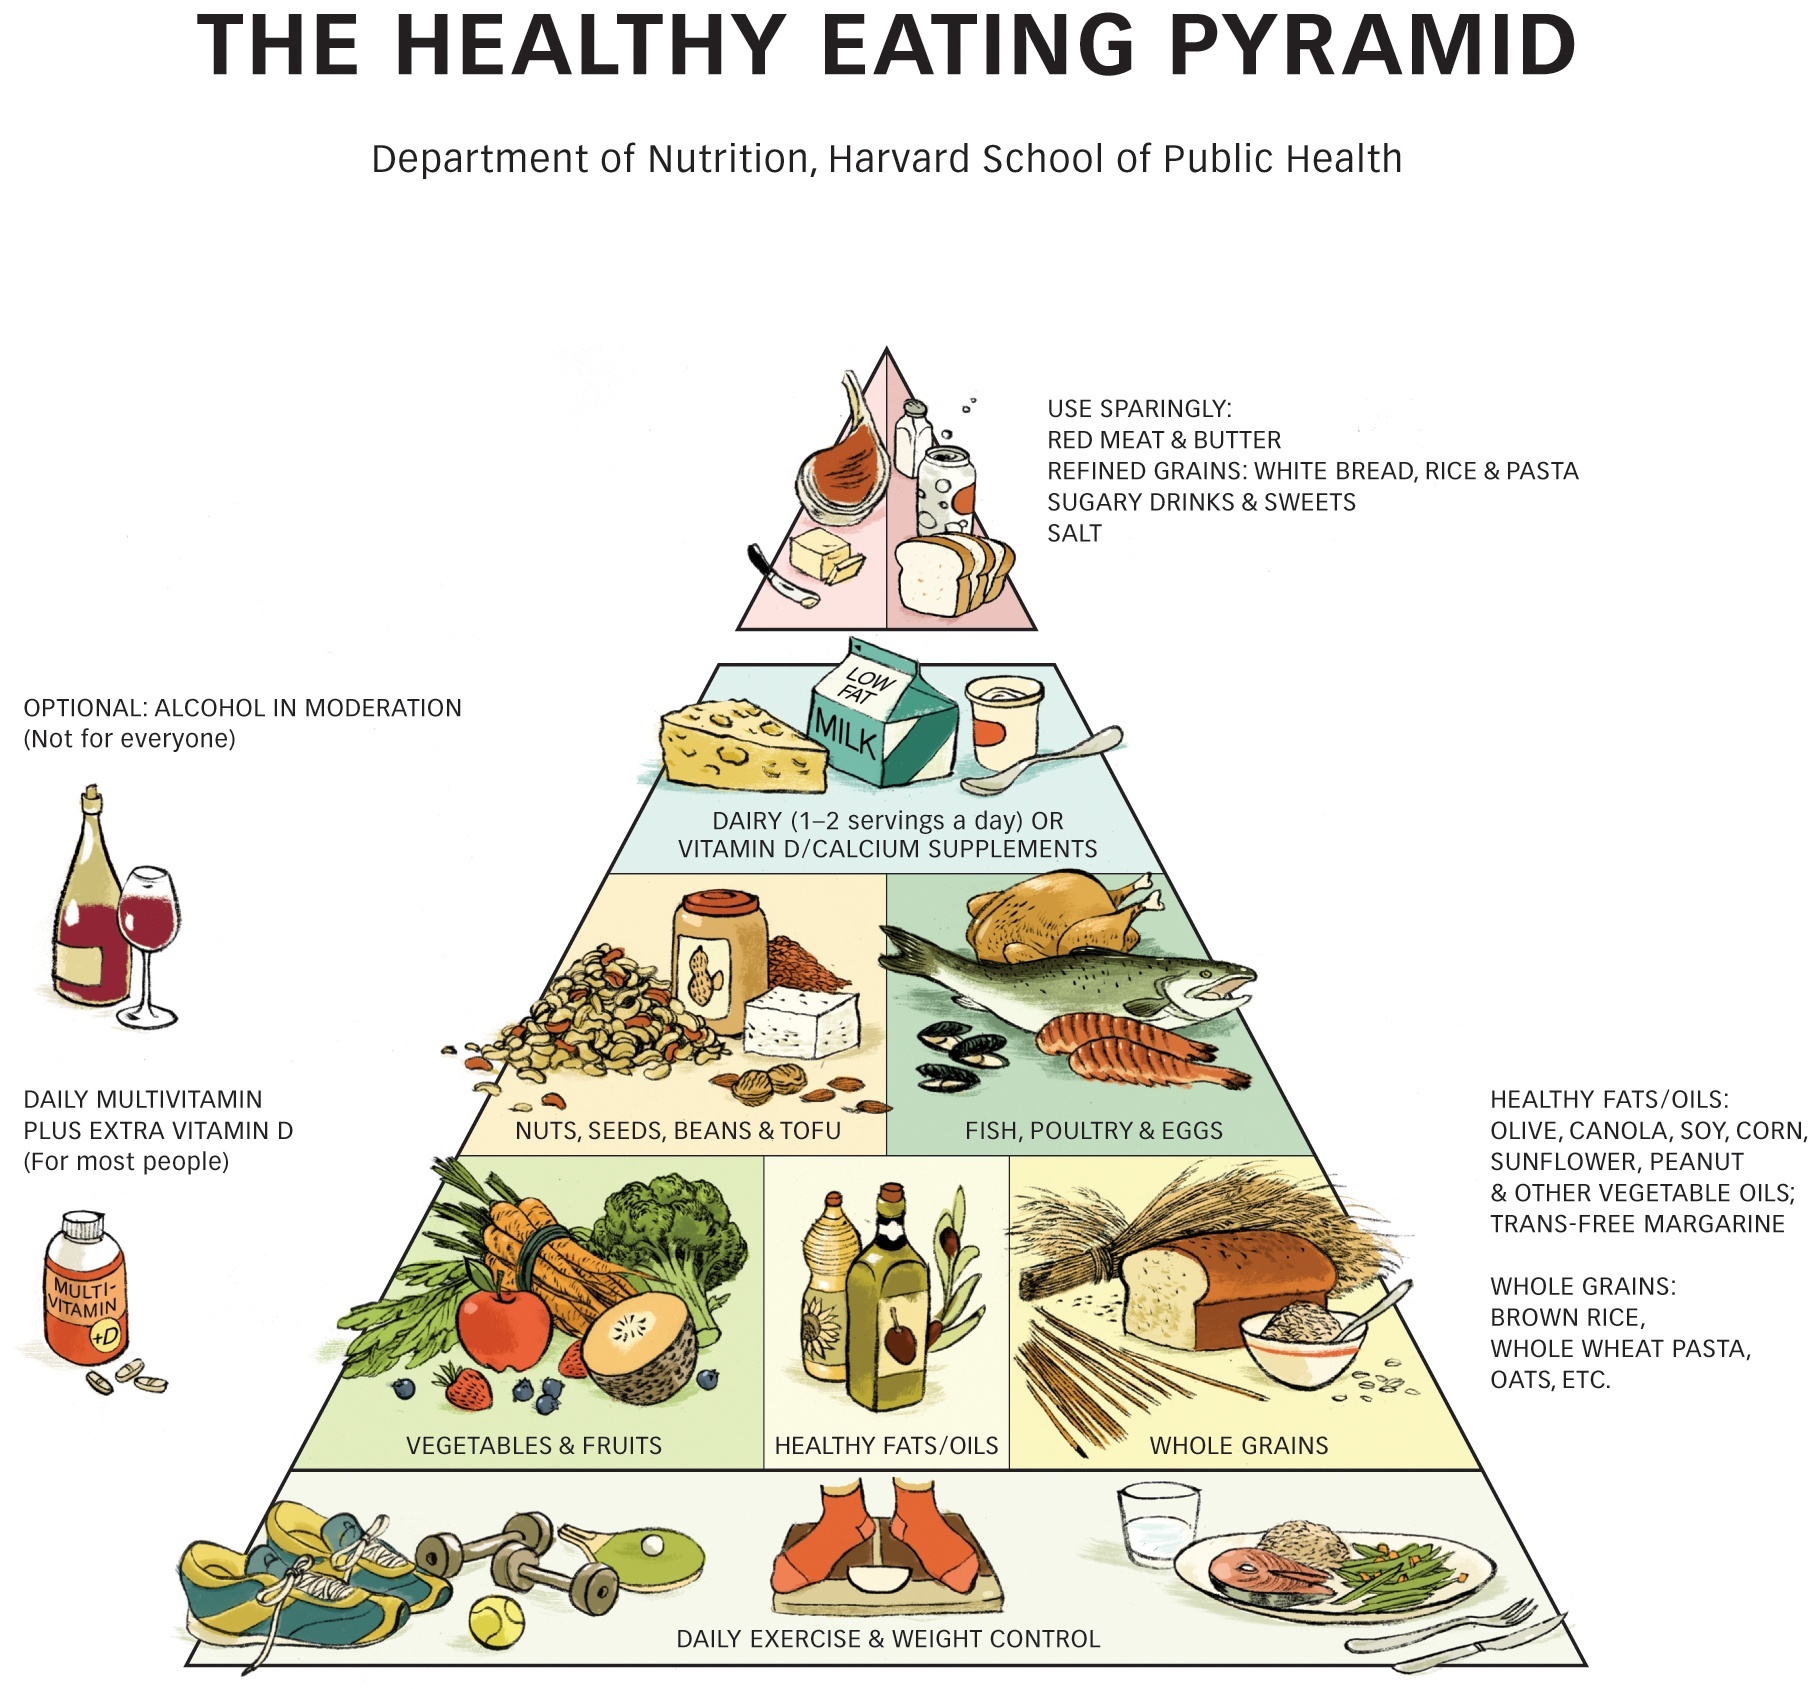 Proven Hoaxes That People Still Believe - The Healthy Eating Pyramid